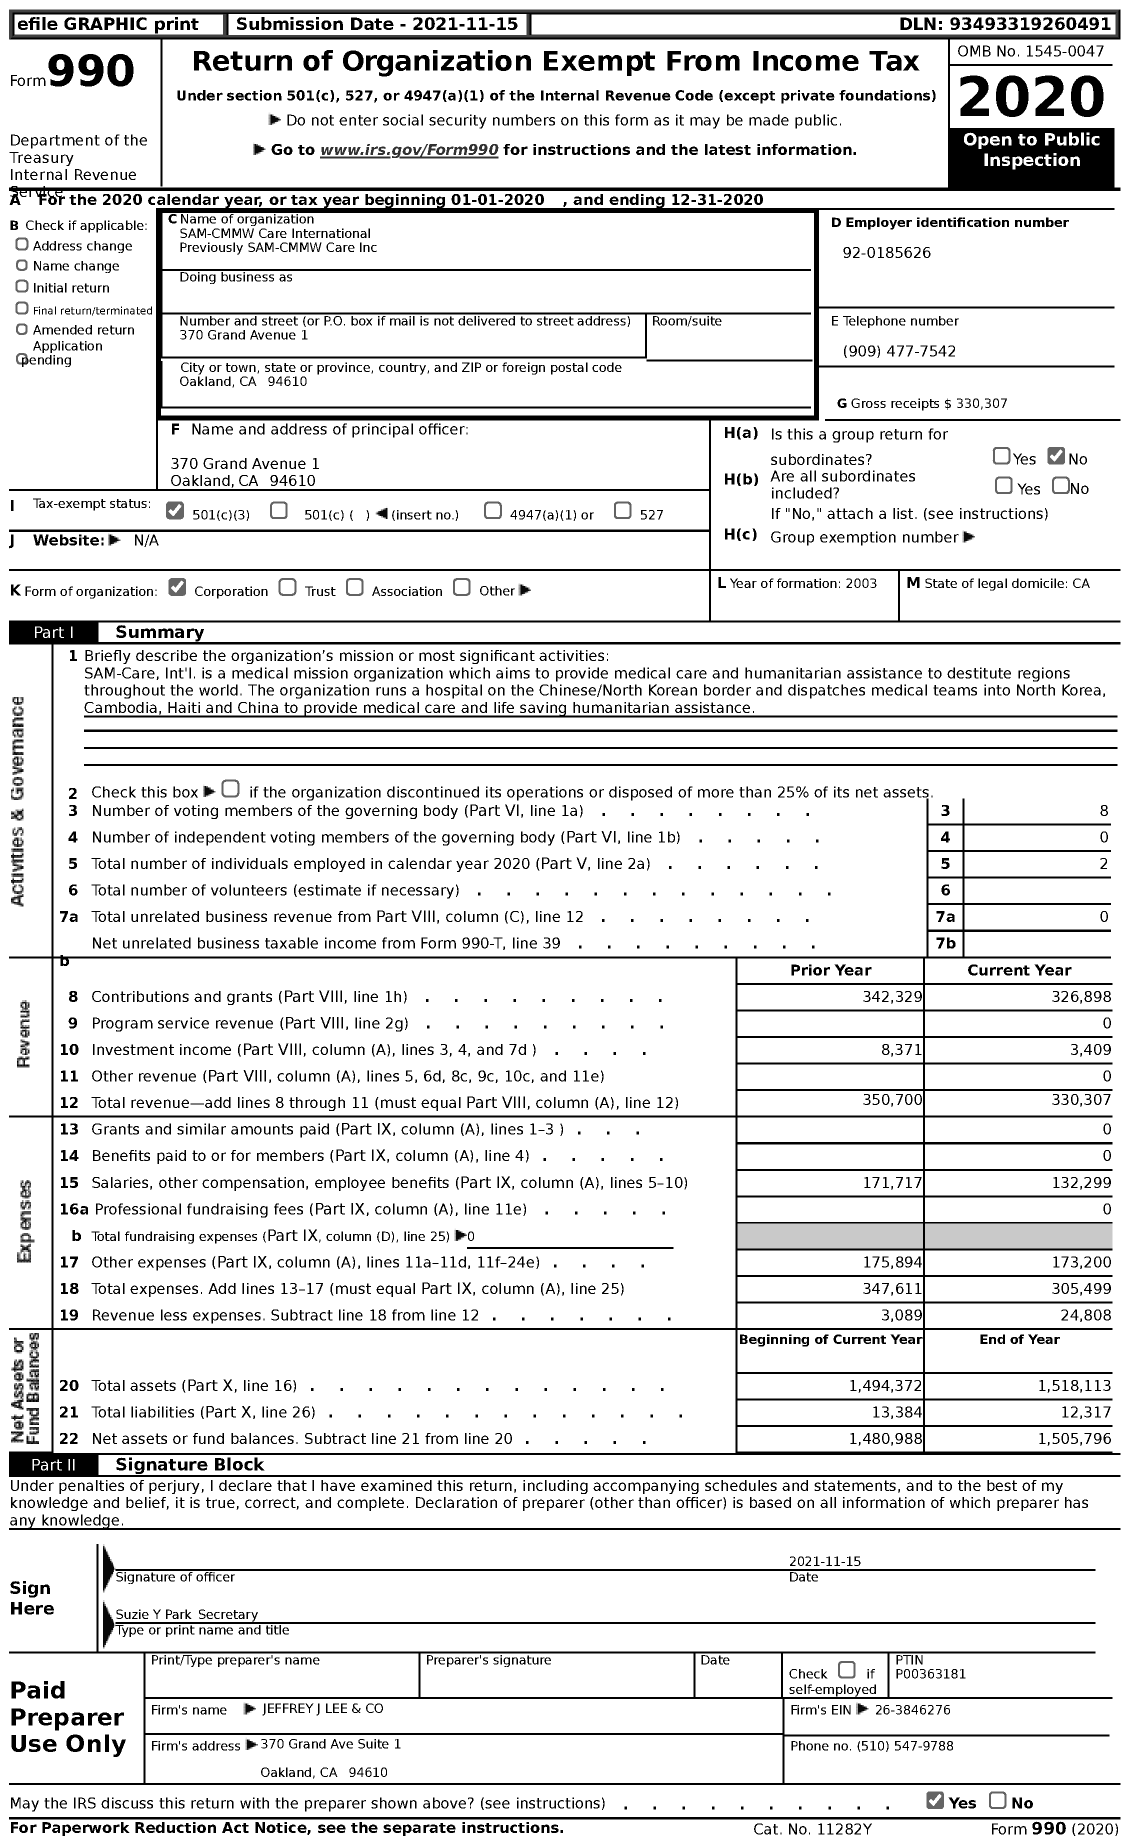 Image of first page of 2020 Form 990 for SAM-CMMW Care International Previously SAM-CMMW Care